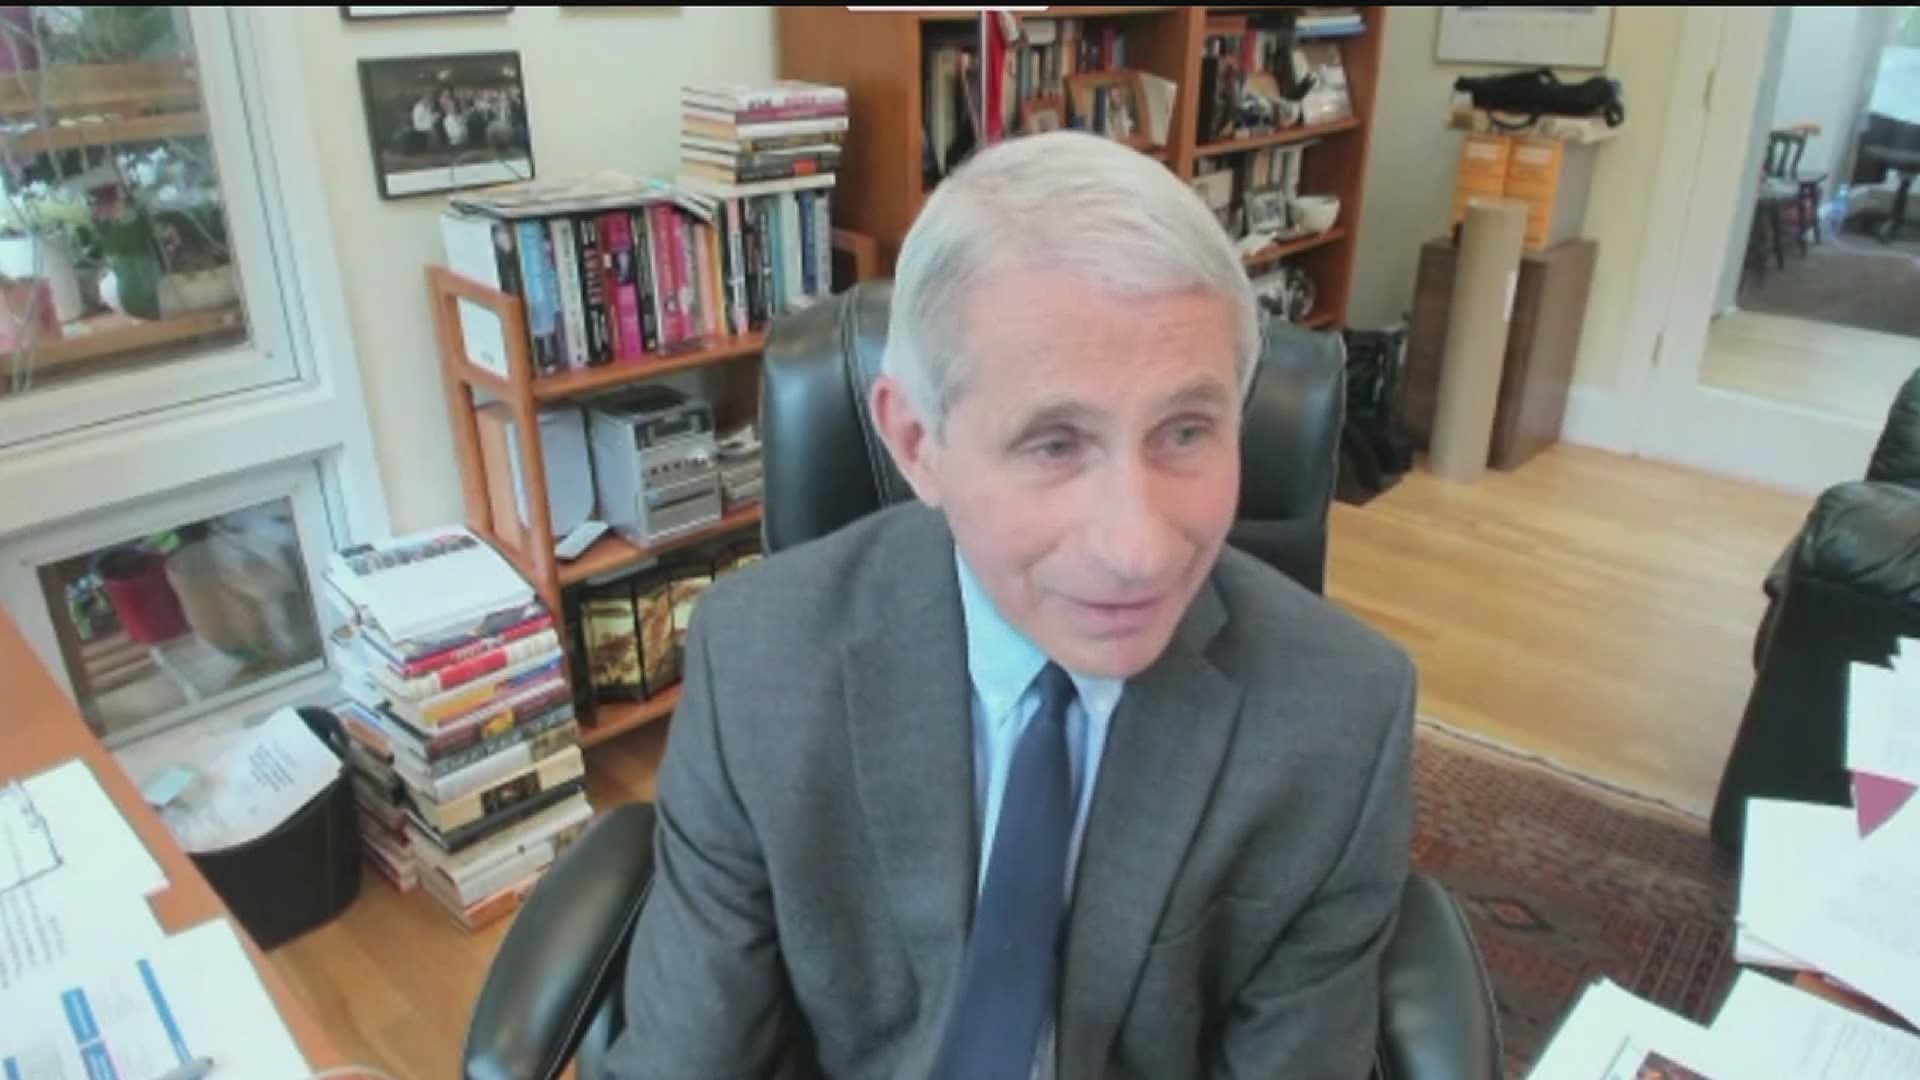 Dr. Anthony Fauci said little spikes could lead to outbreaks.